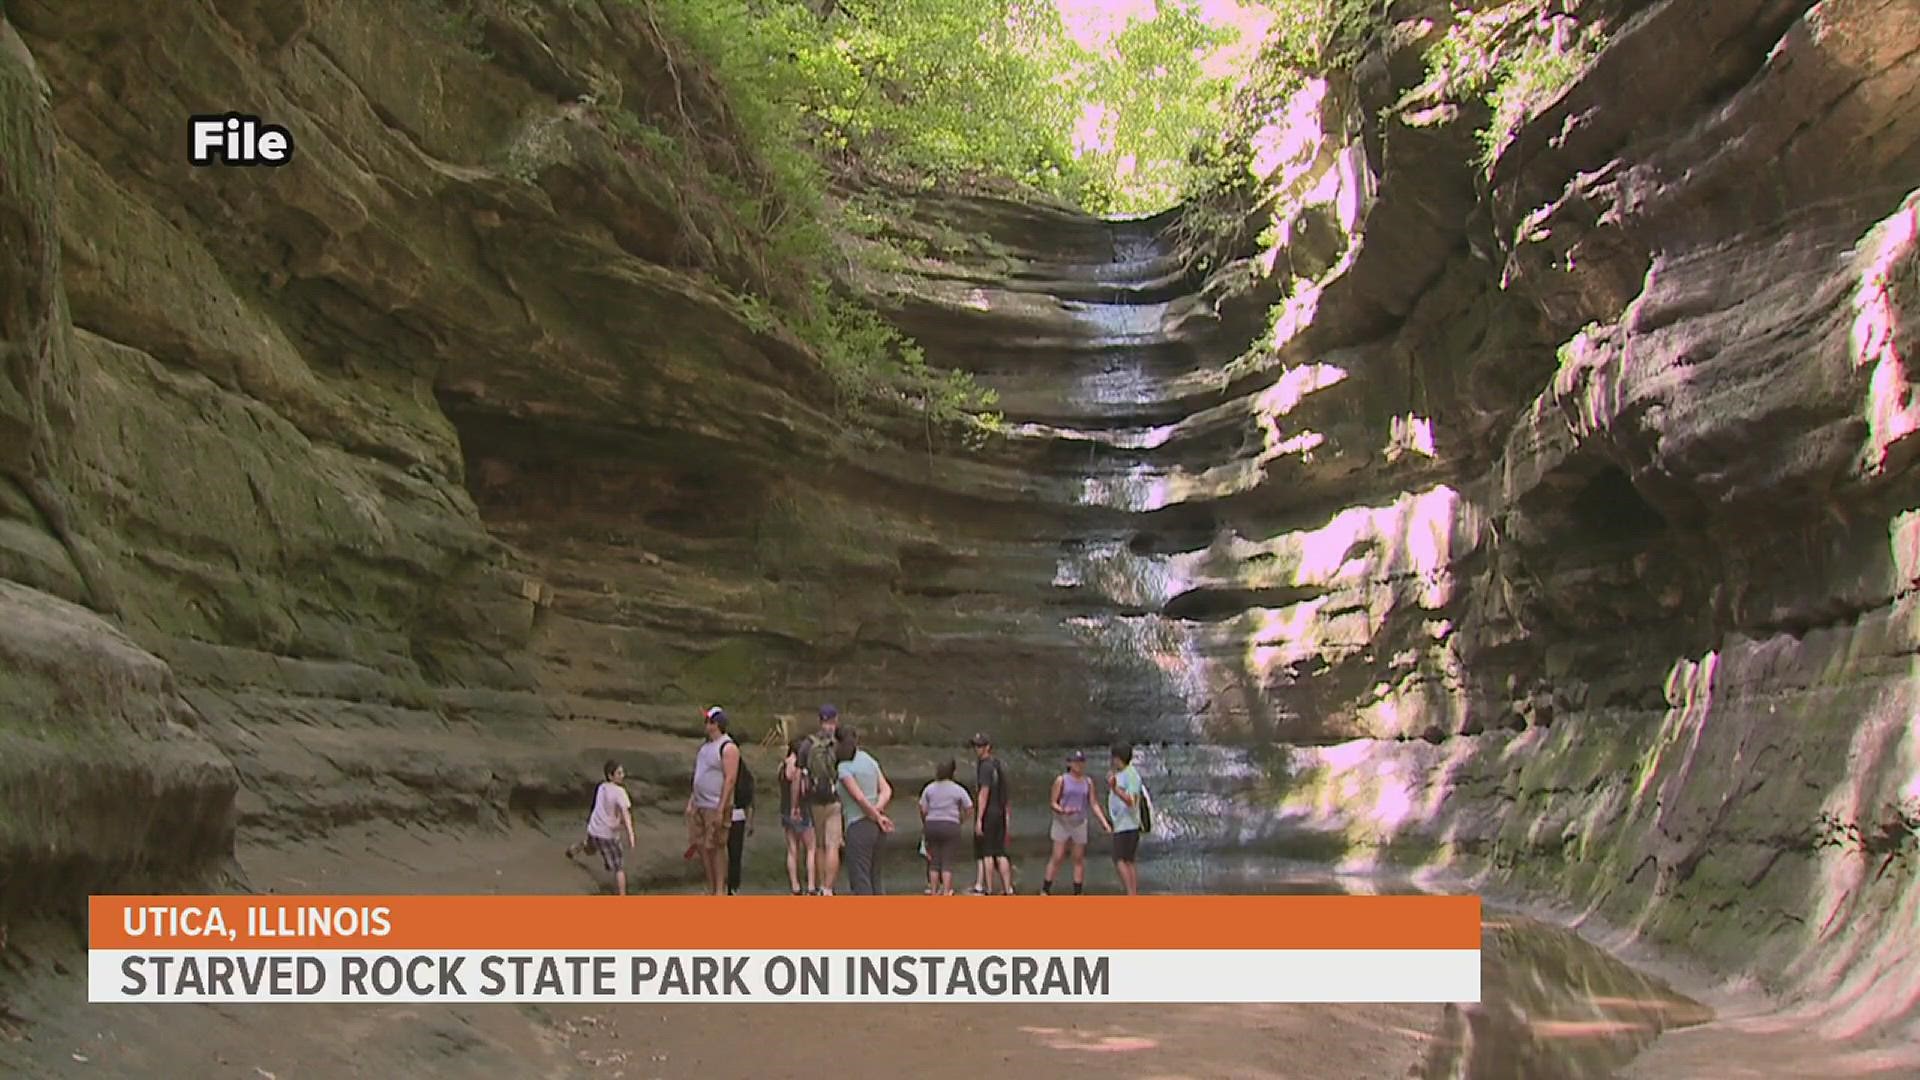 A new report says Starved Rock State Park is one of the most popular parks in the country. Starved Rock ranks 7th behind places like Niagra Falls and Devil's Lake.